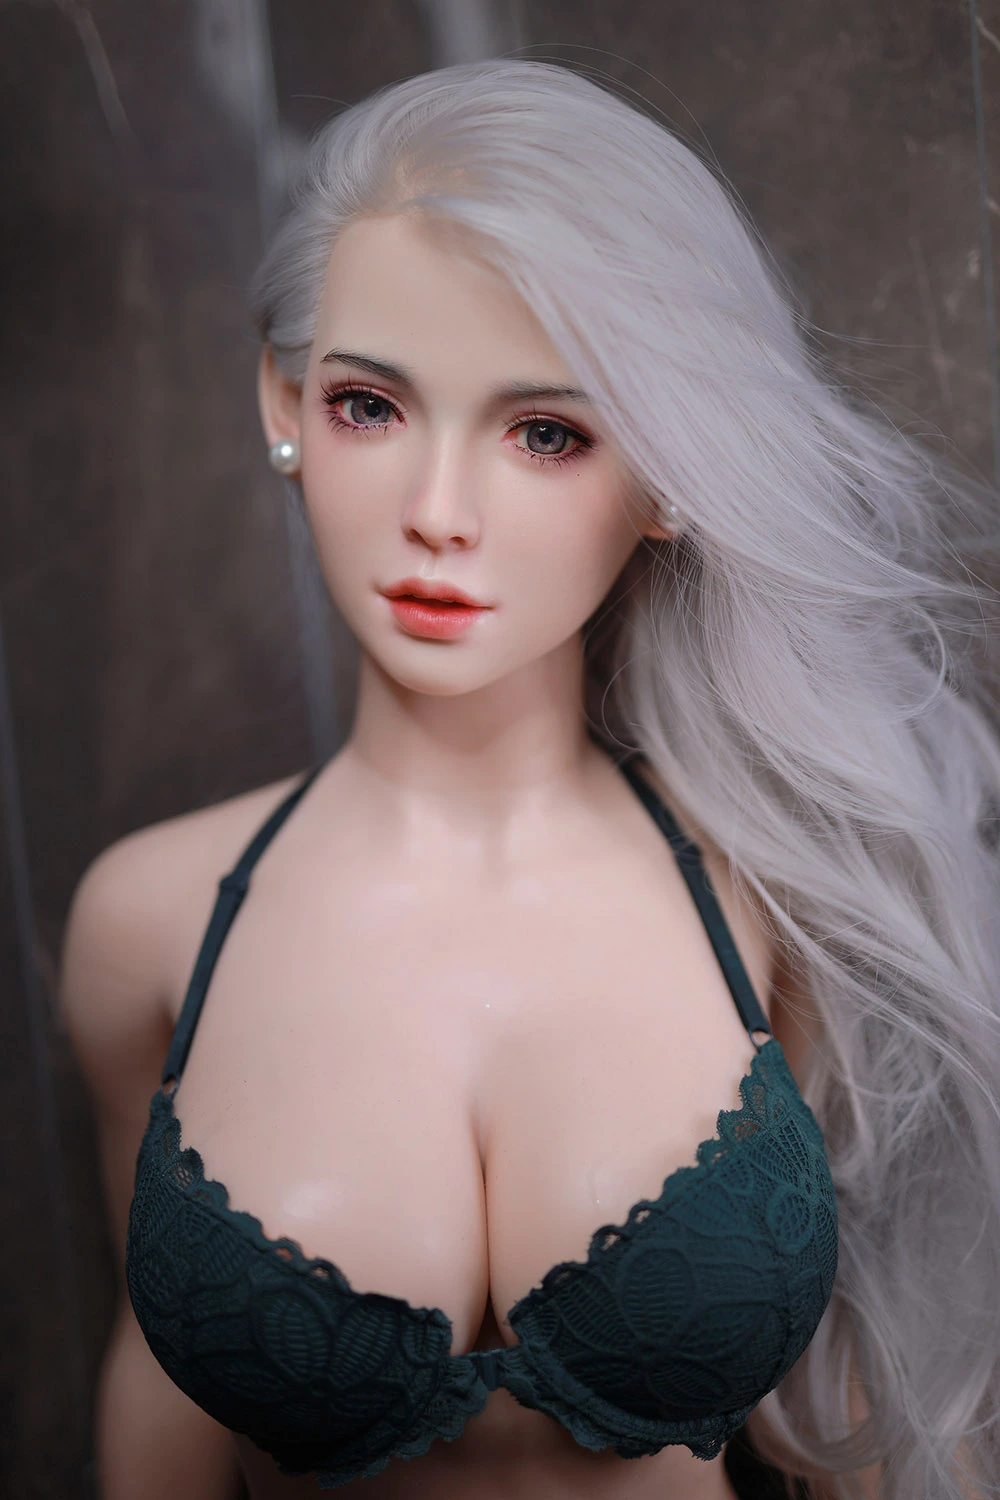 10 Fun Facts About Sex Doll